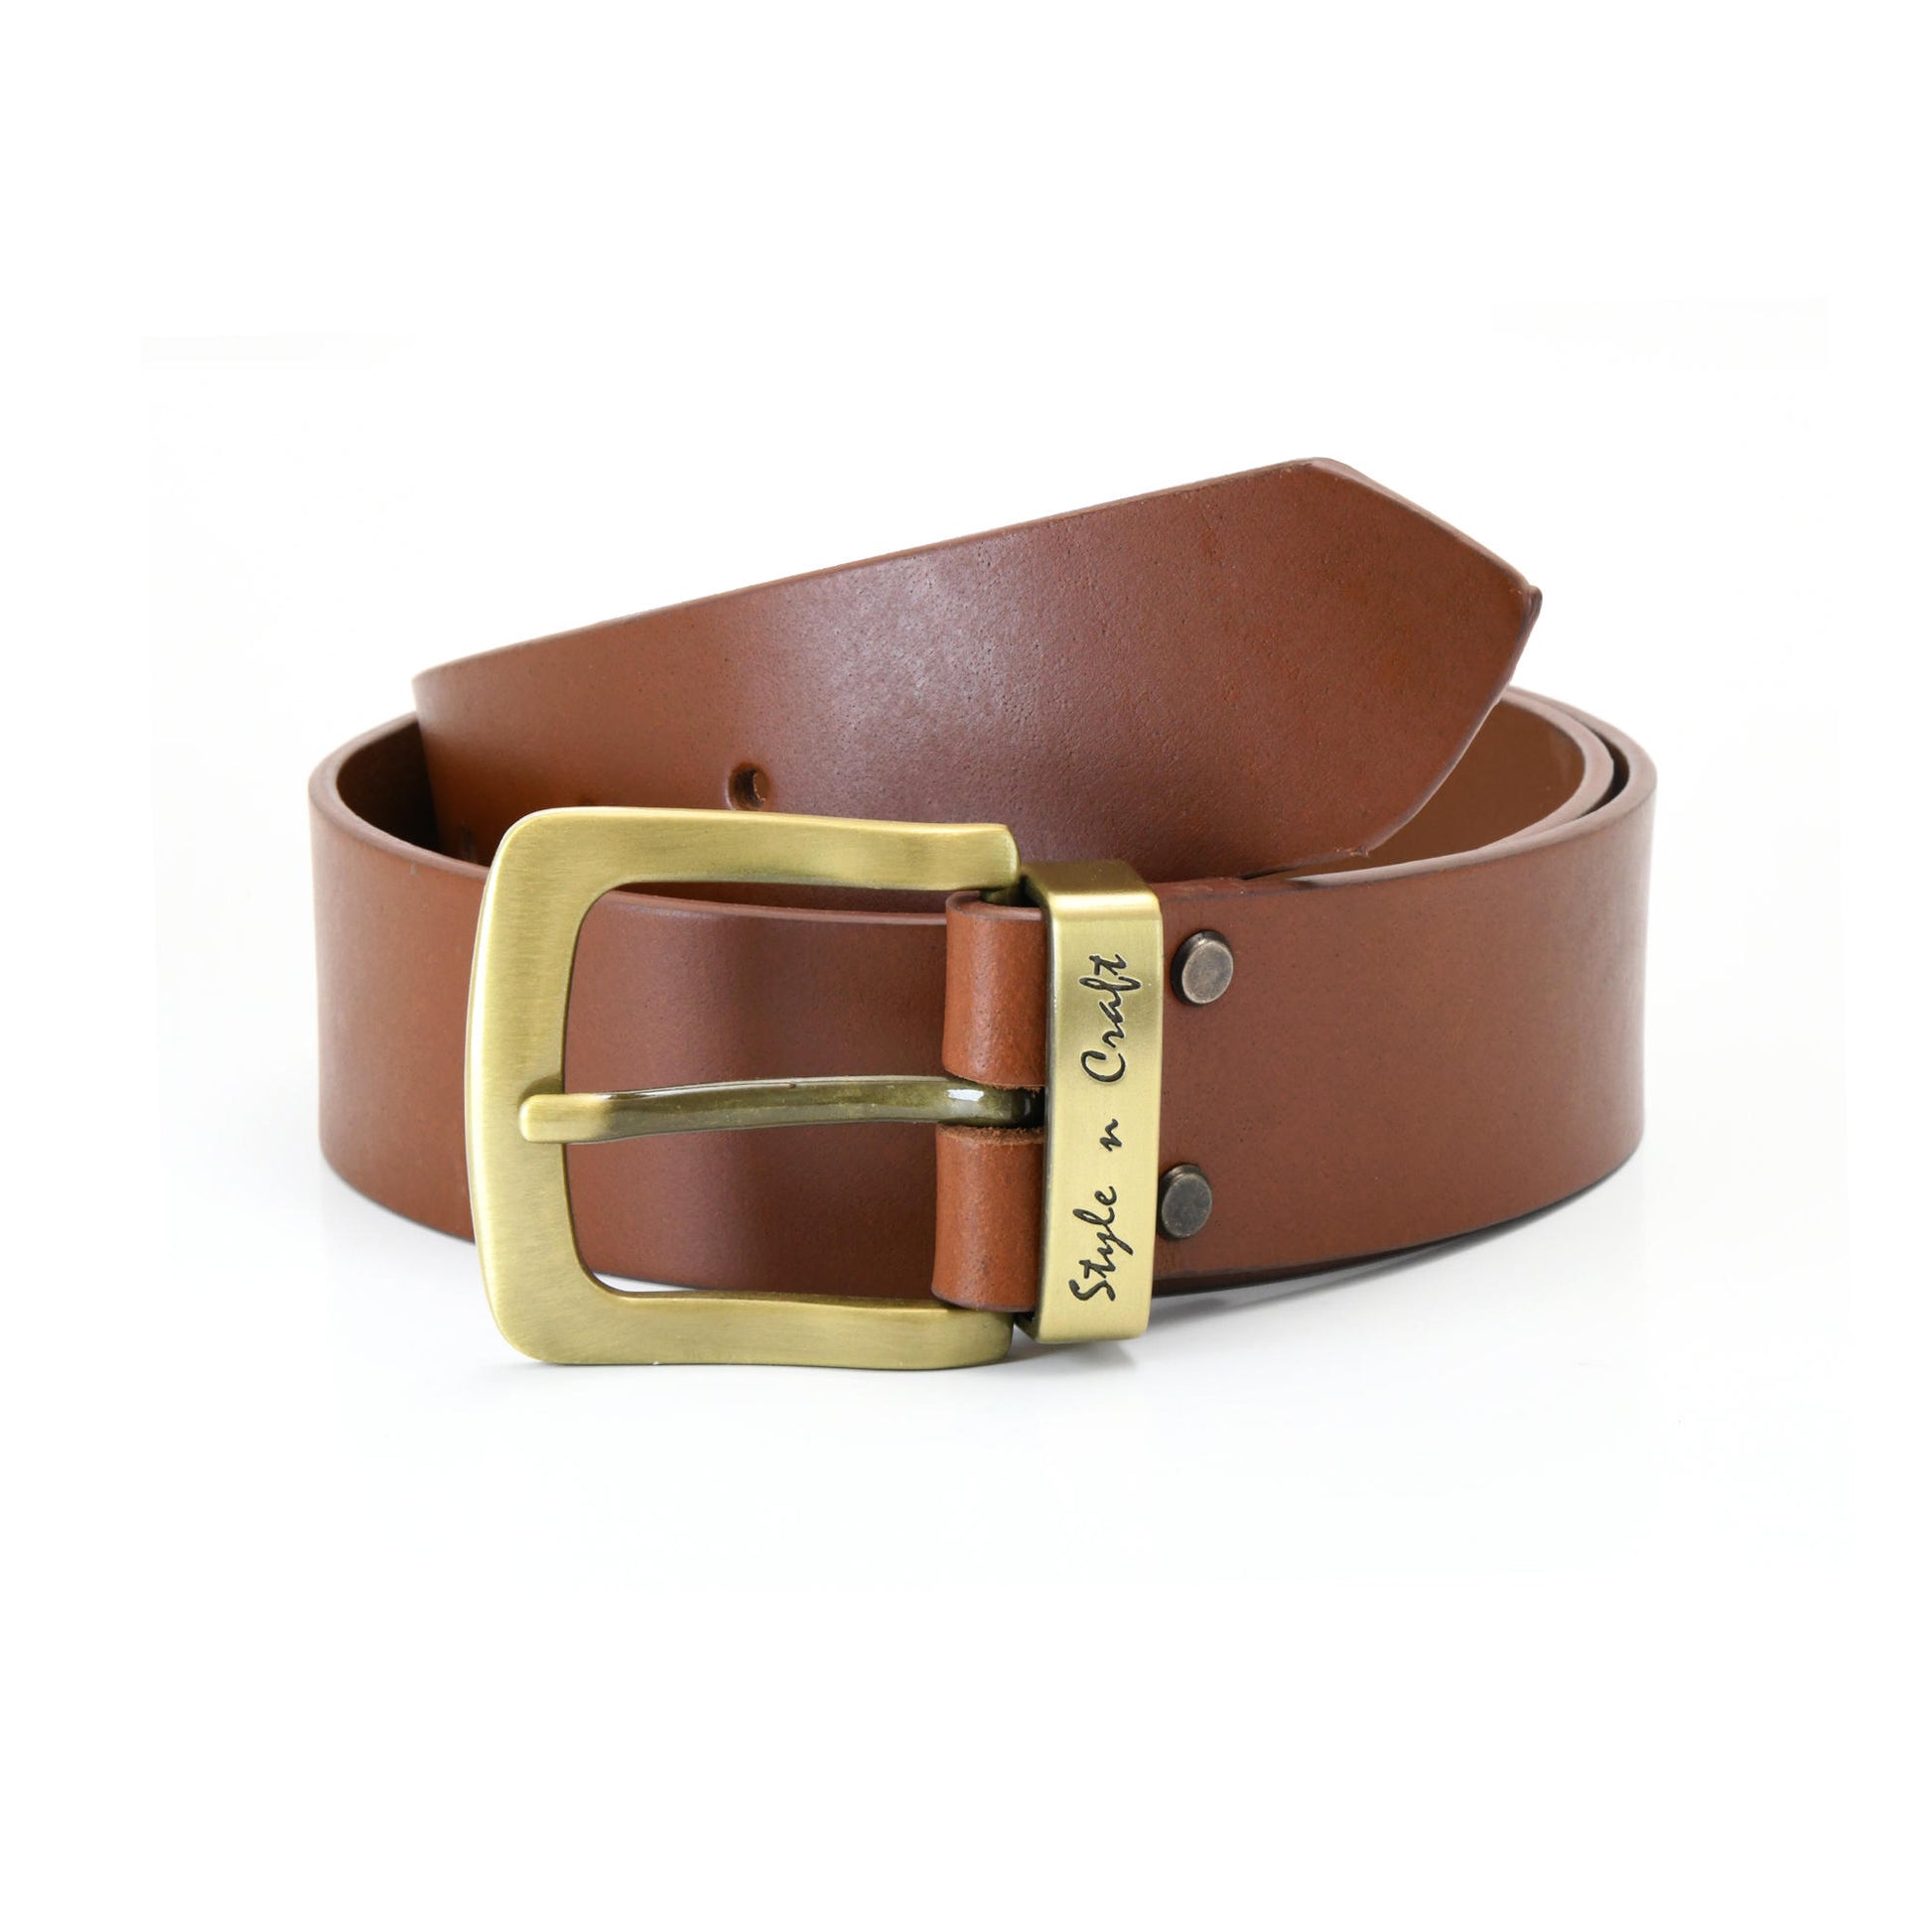 392714 - one and a half inch wide leather belt in tan color full grain leather with matte gold finish metal buckle & loop - front view 1